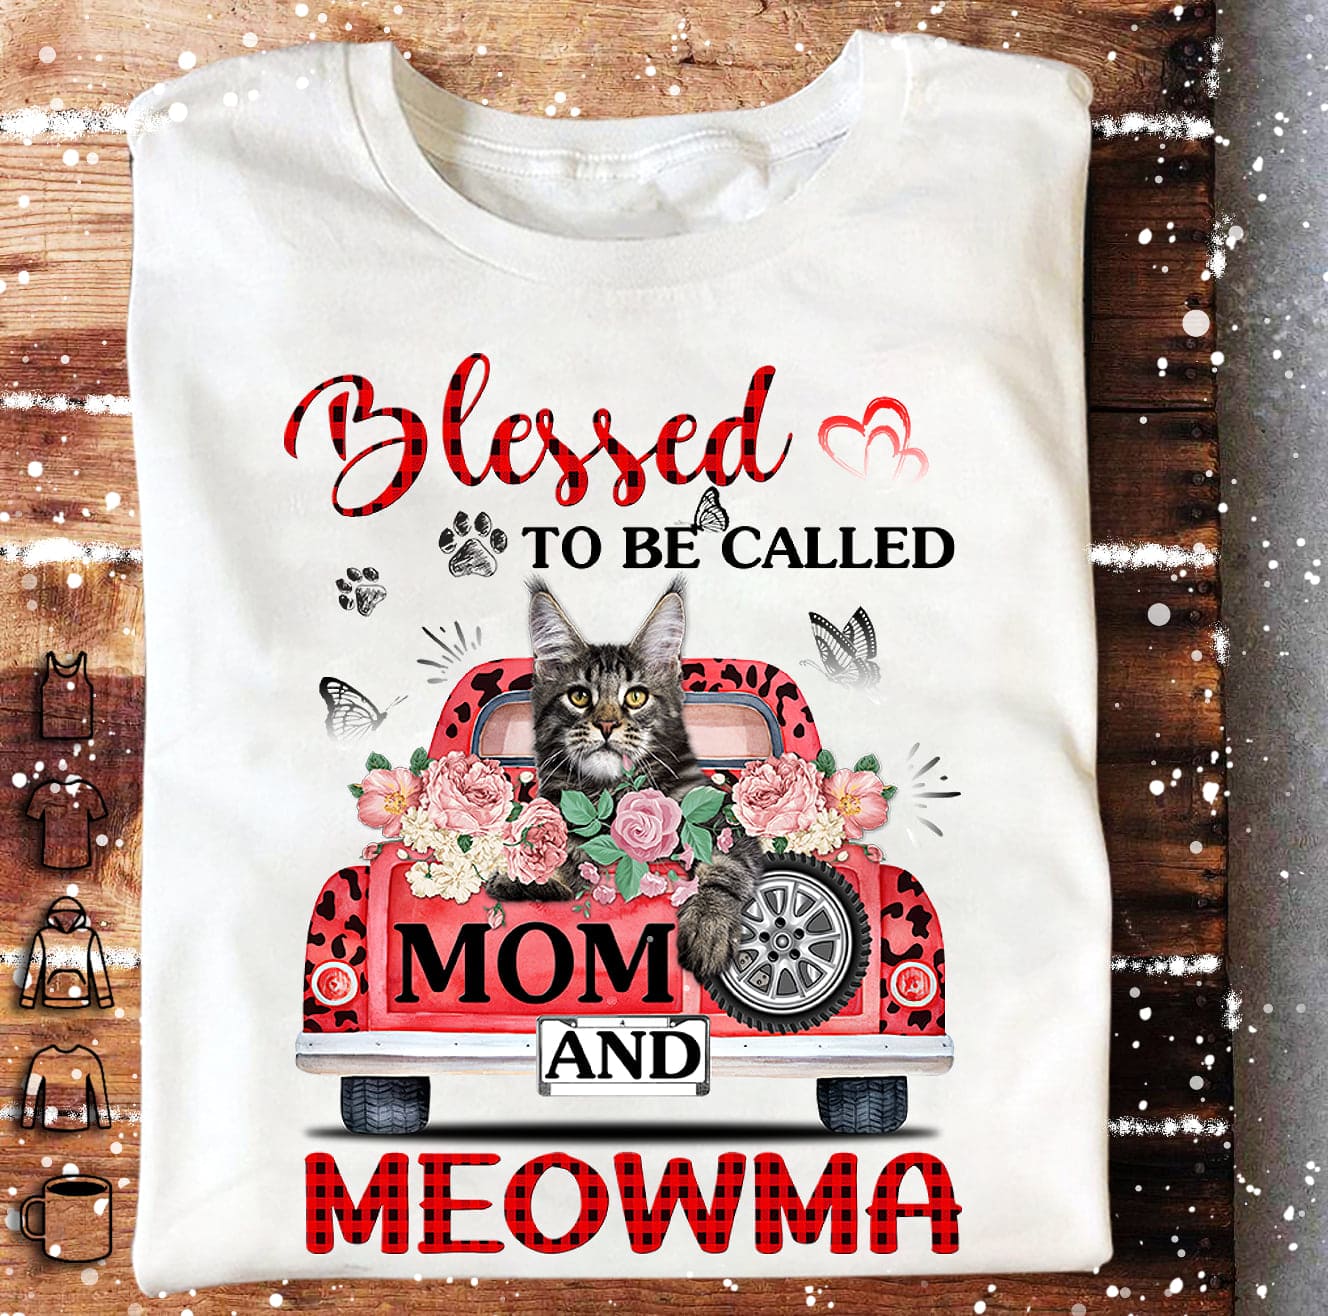 Blessed to be called mom and meowma - Cat mom gift, Cat on truck